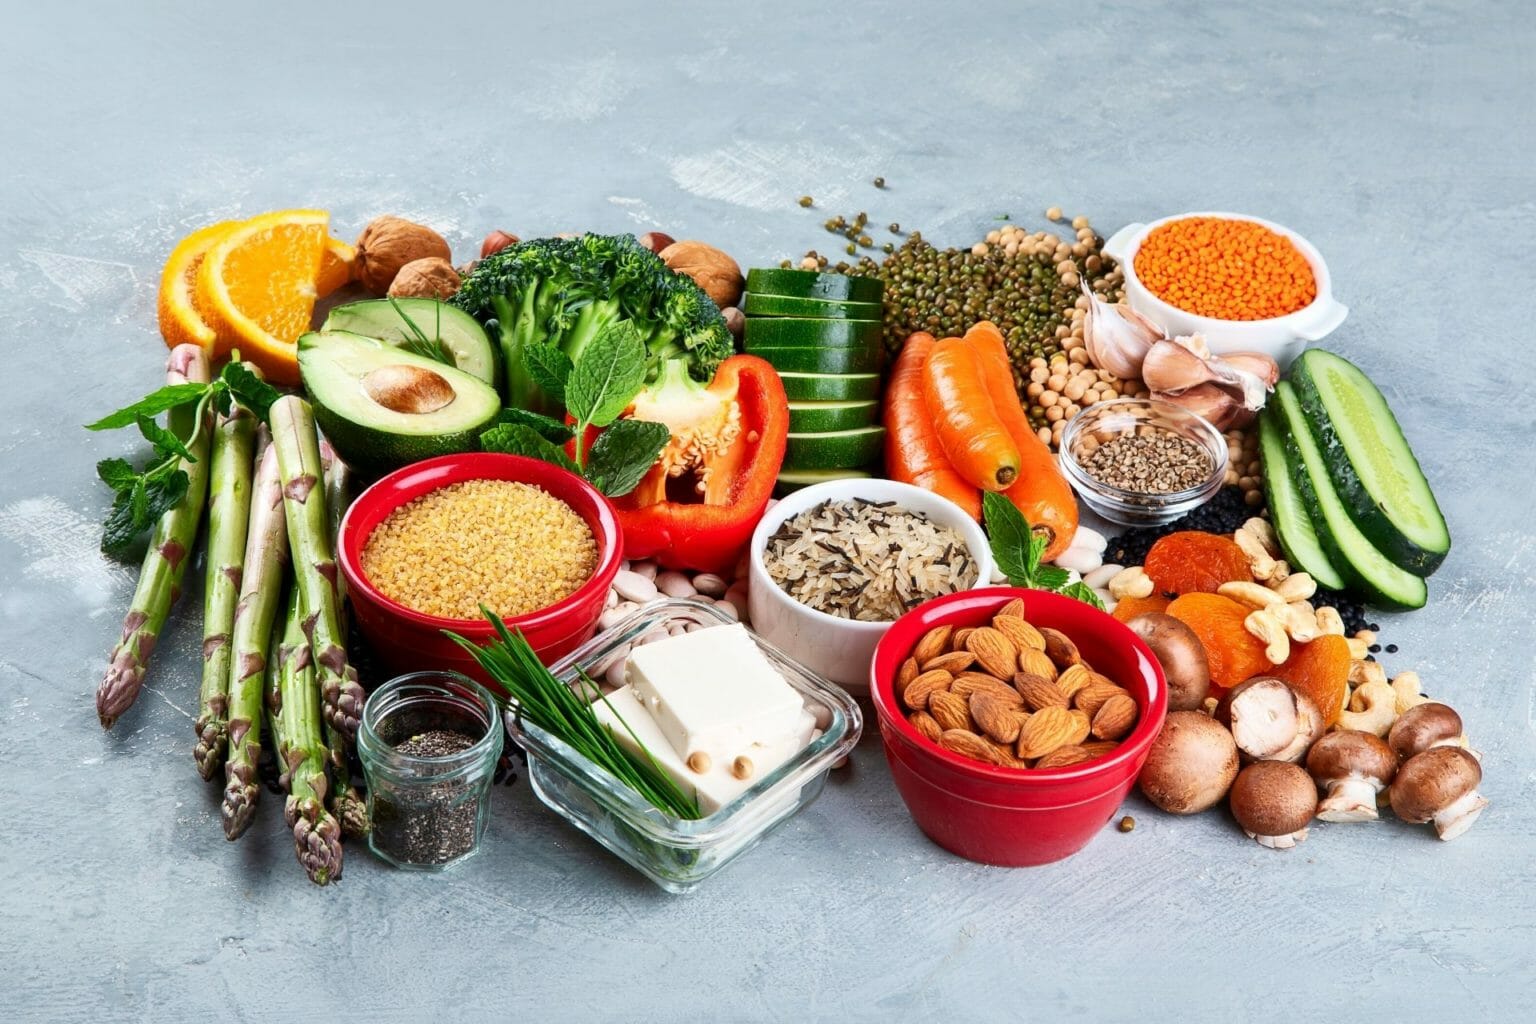 CKD and Kidney Detox Diets: Are They Effective? | RenalTracker Blog